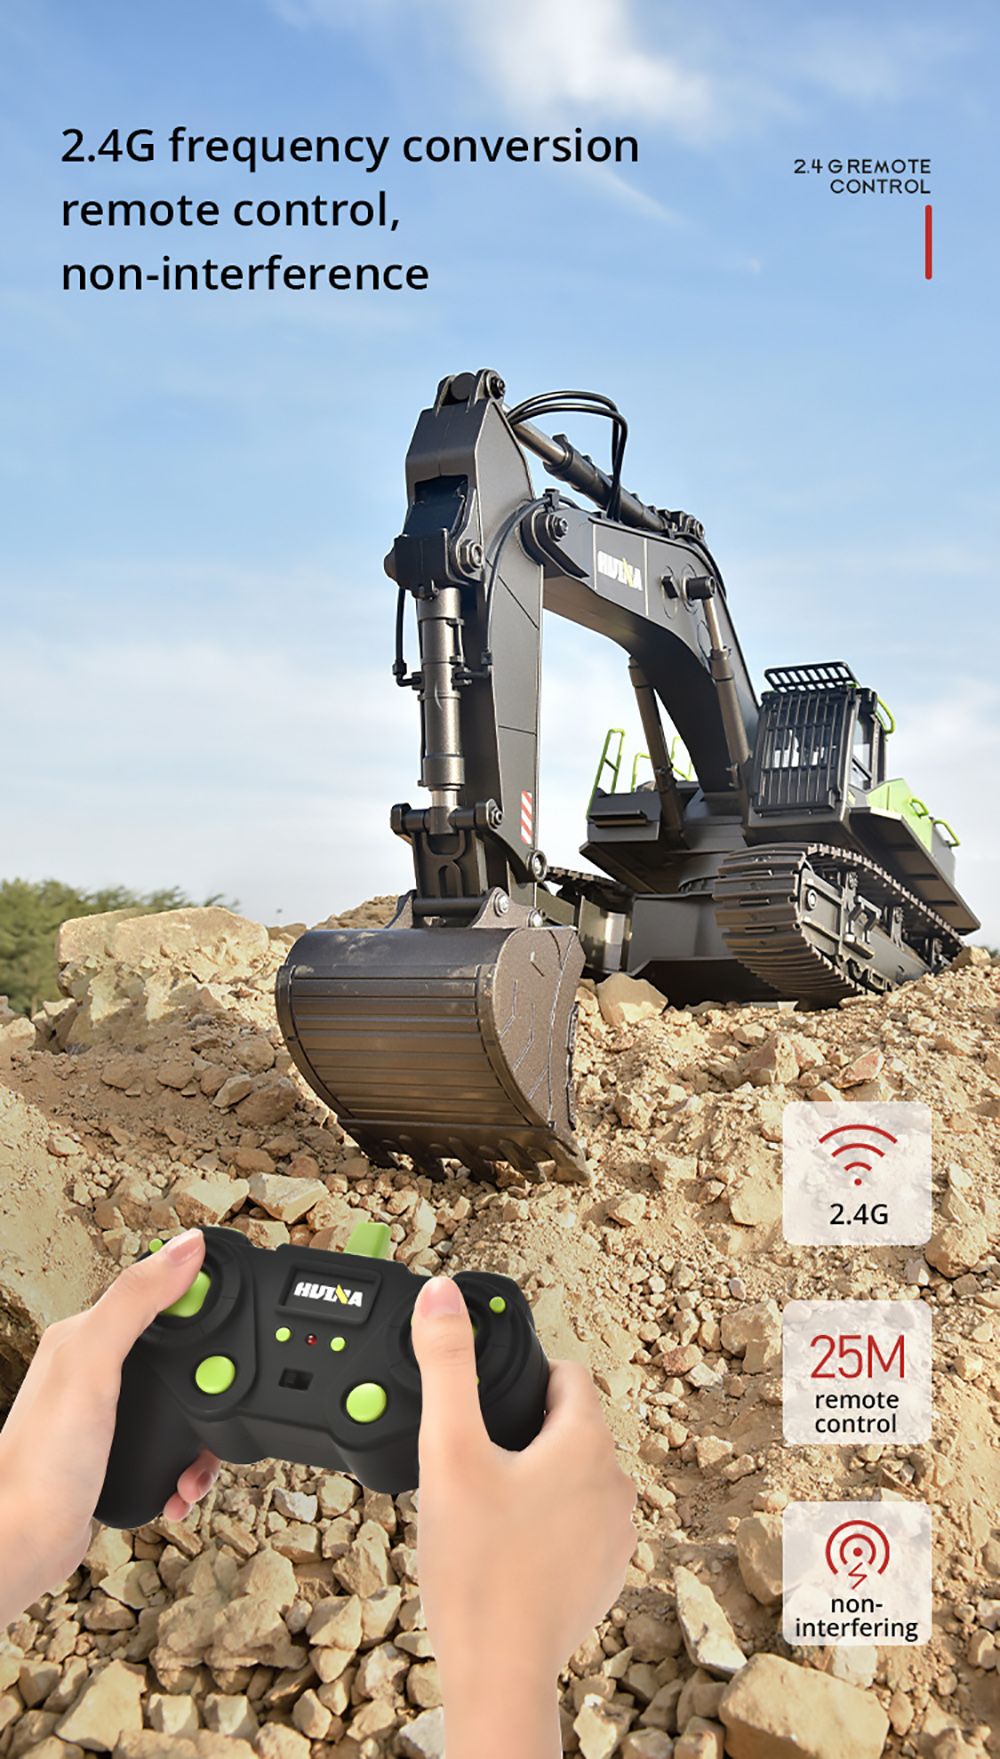 HUINA 593 RC Excavator Simulation Alloy Toy Multi-functional with Remote Control